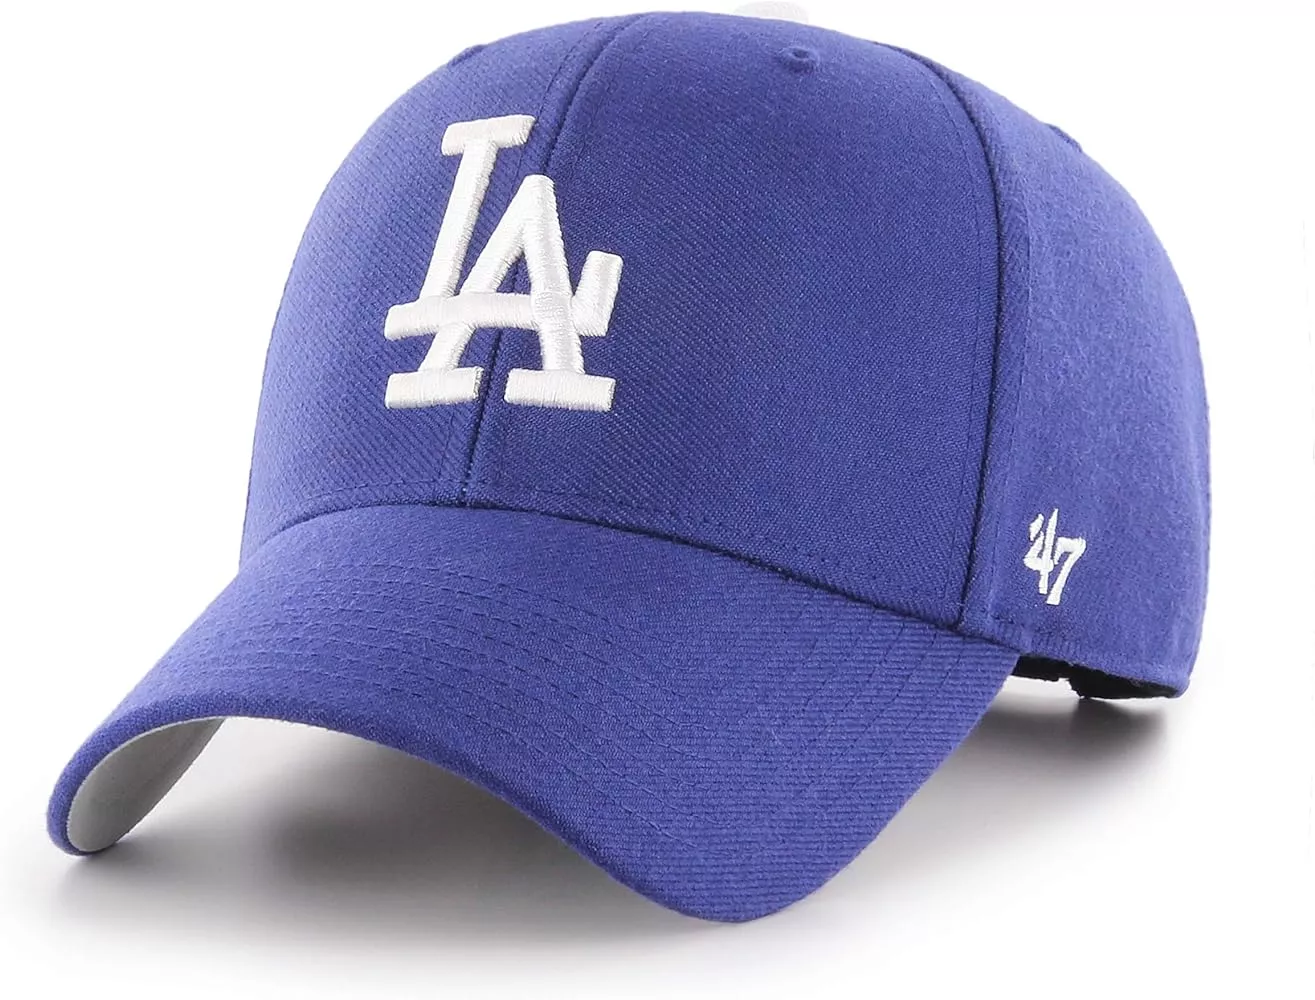  '47 Los Angeles LA Dodgers Clean Up Adjustable Hat - Moss  Green/White, Unisex, Adult - MLB Baseball Cap : Sports & Outdoors